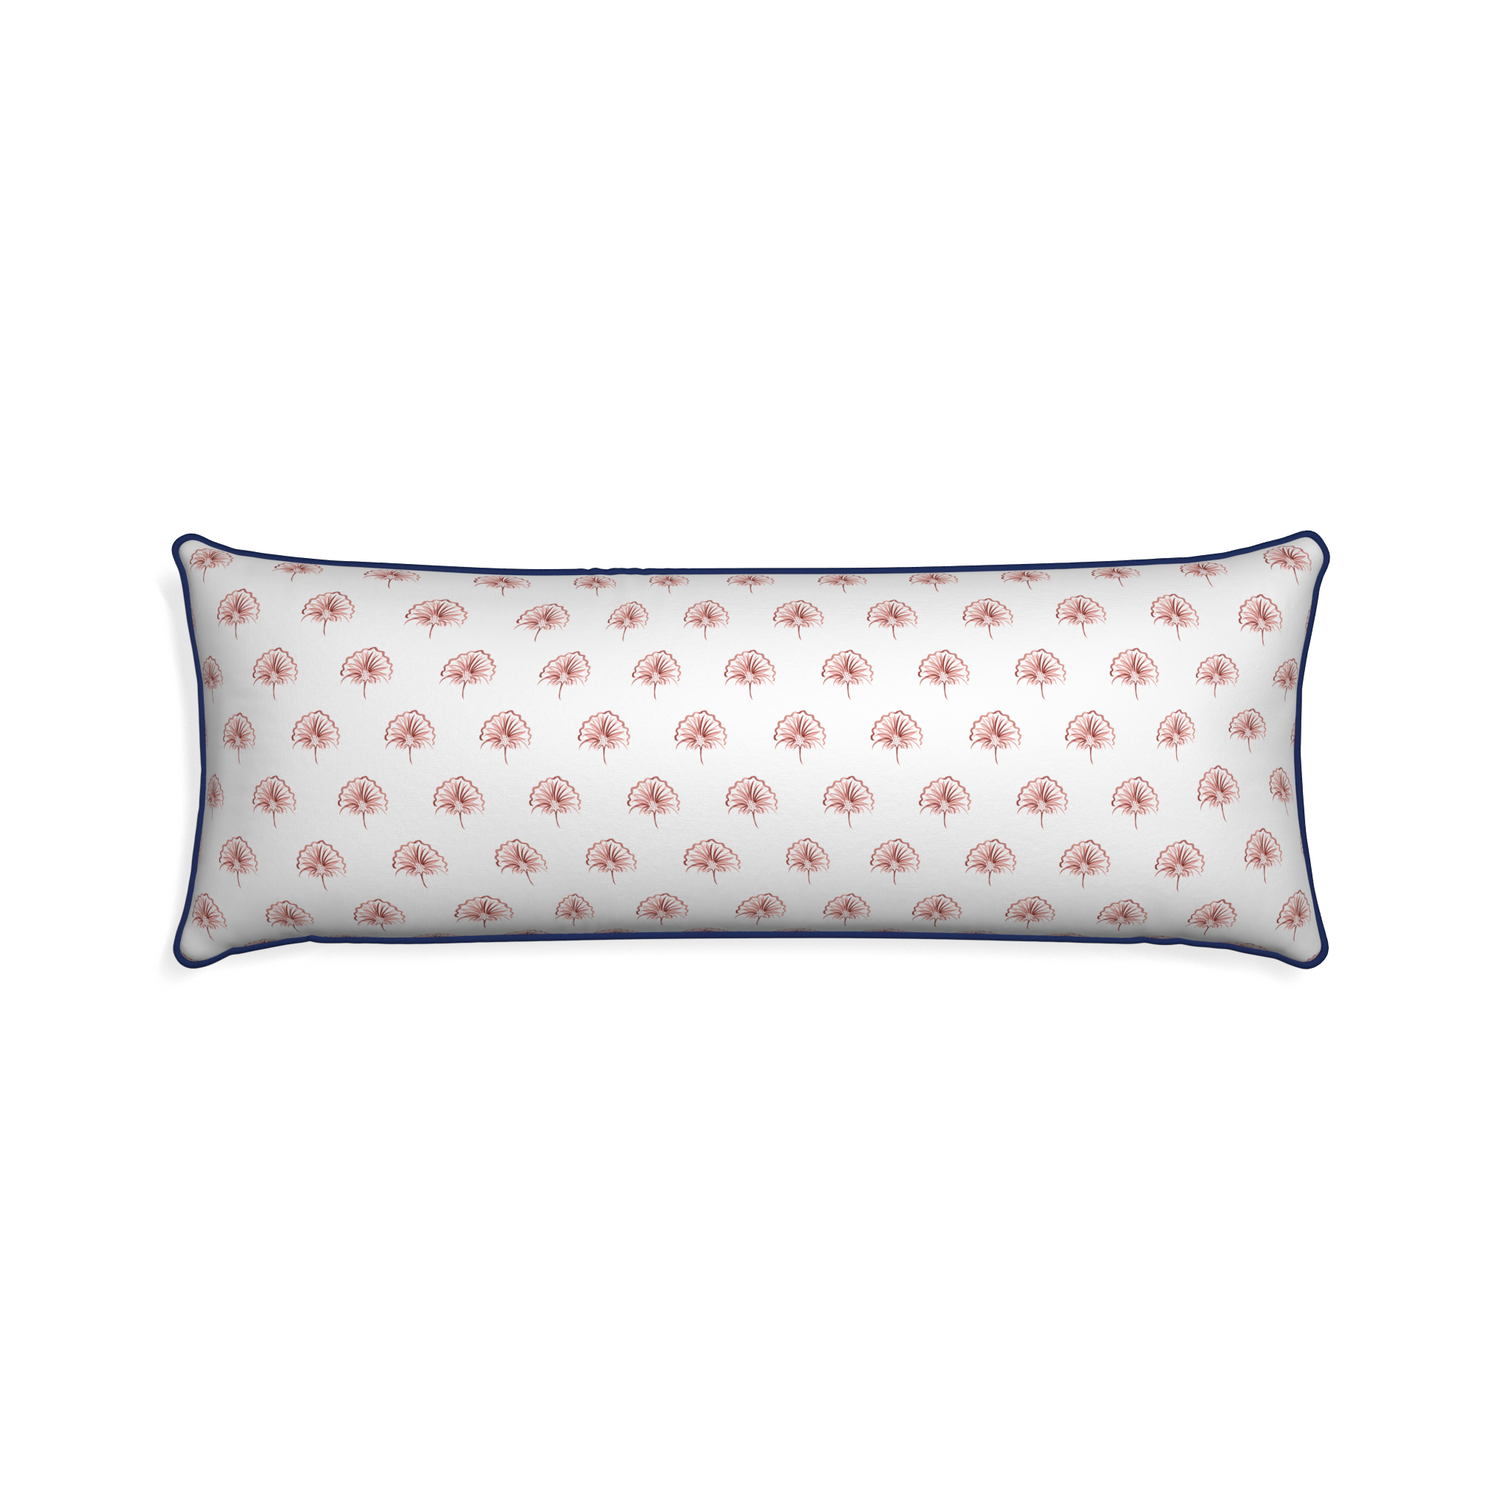 Xl-lumbar penelope rose custom floral pinkpillow with midnight piping on white background